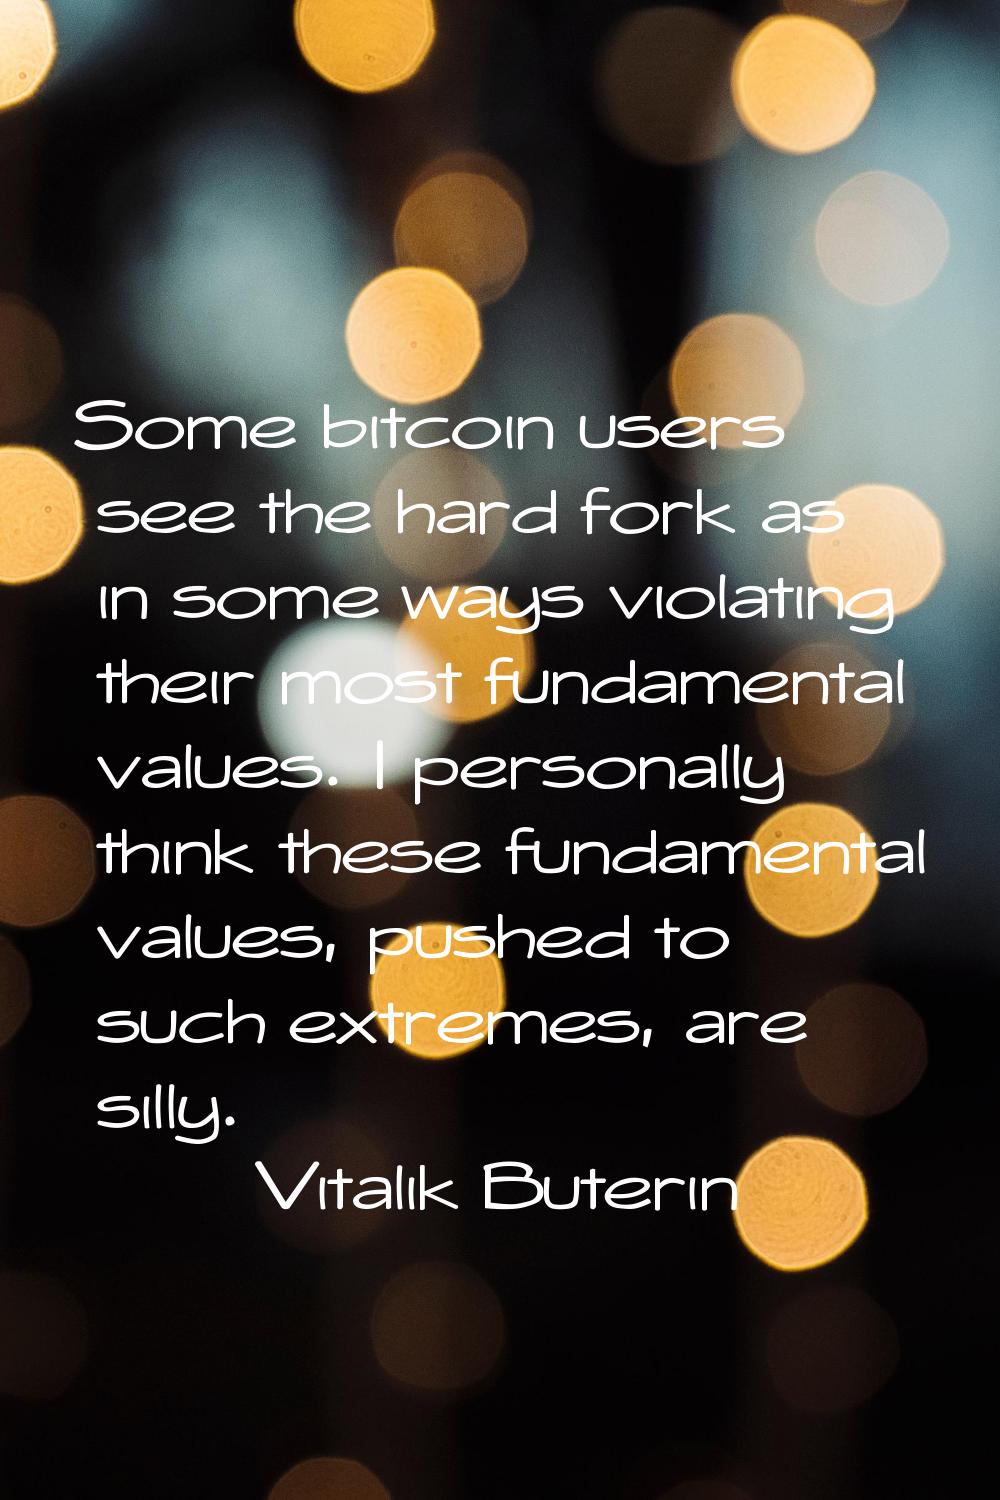 Some bitcoin users see the hard fork as in some ways violating their most fundamental values. I per